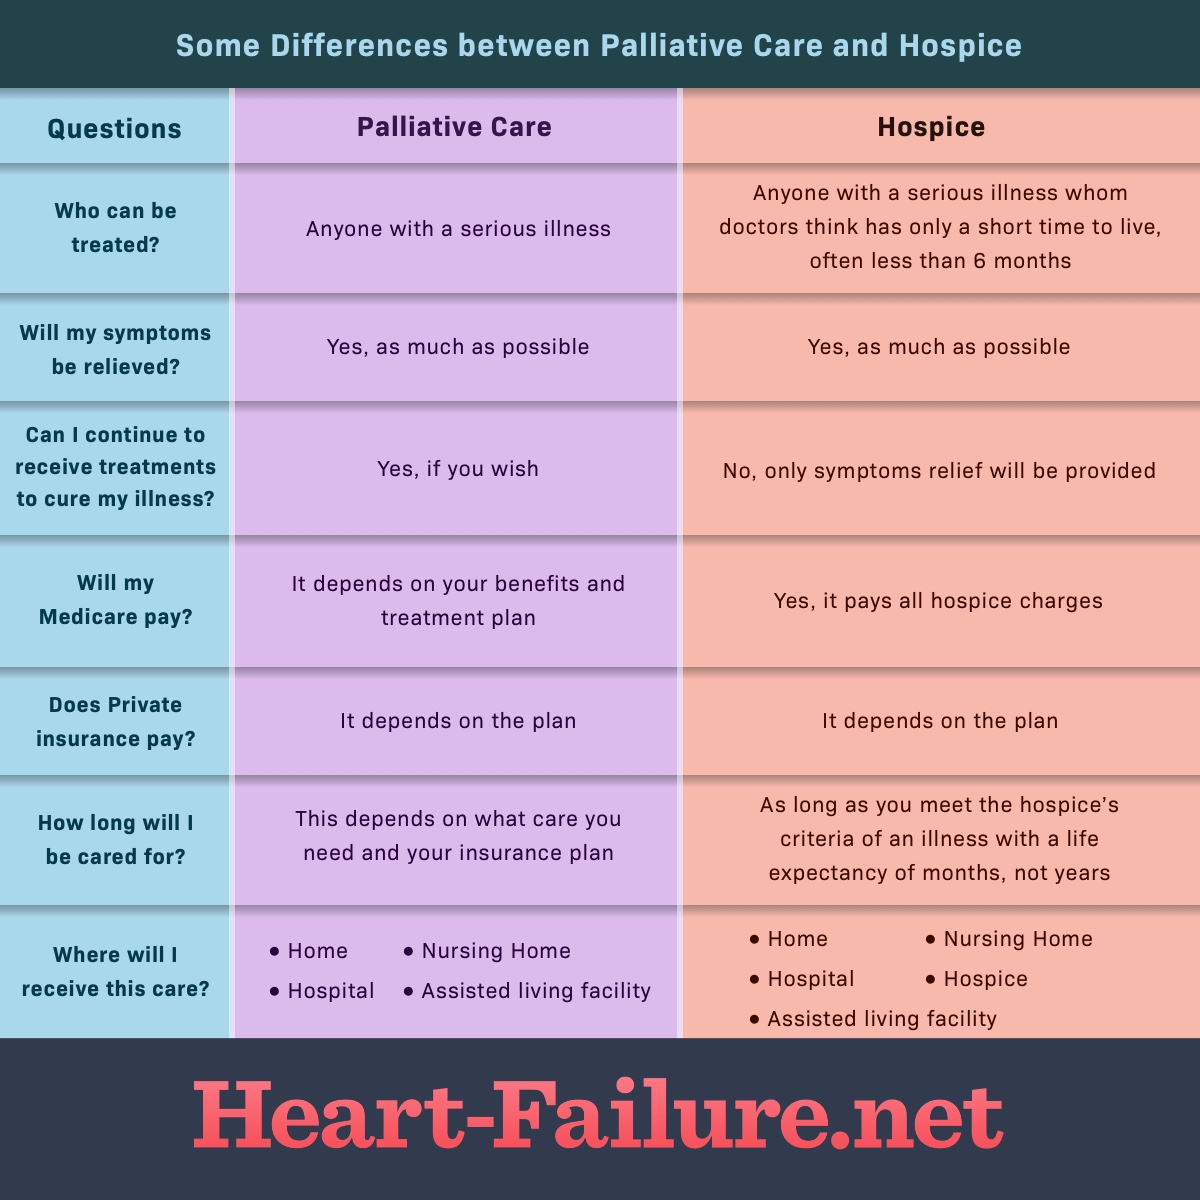 A chart comparing palliatve care and hospice for heart failure patients